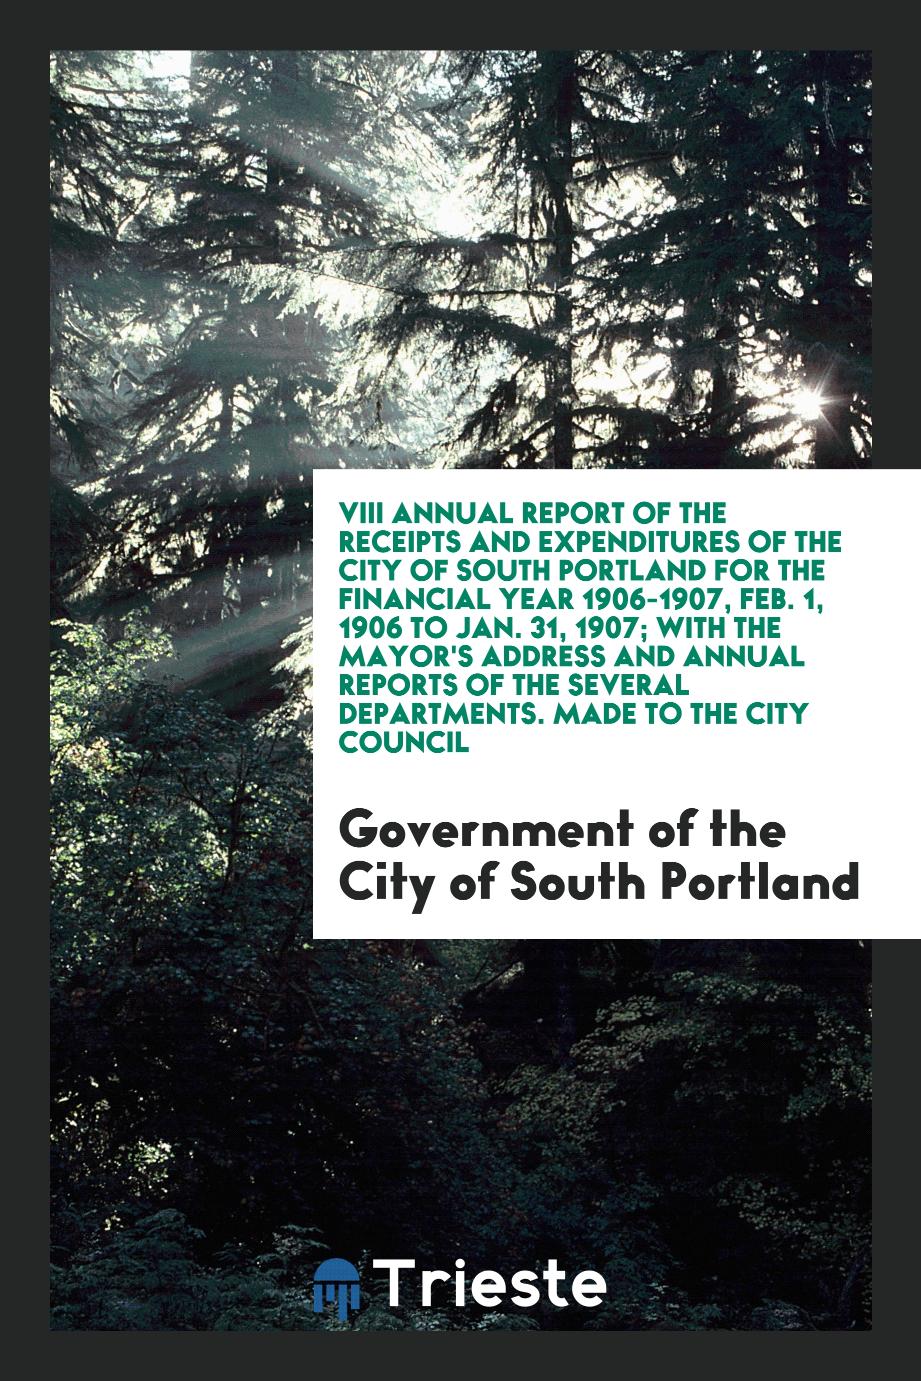 VIII Annual Report of the Receipts and Expenditures of the City of South Portland for the Financial Year 1906-1907, Feb. 1, 1906 to Jan. 31, 1907; With the Mayor's Address and Annual Reports of the Several Departments. Made to the City Council